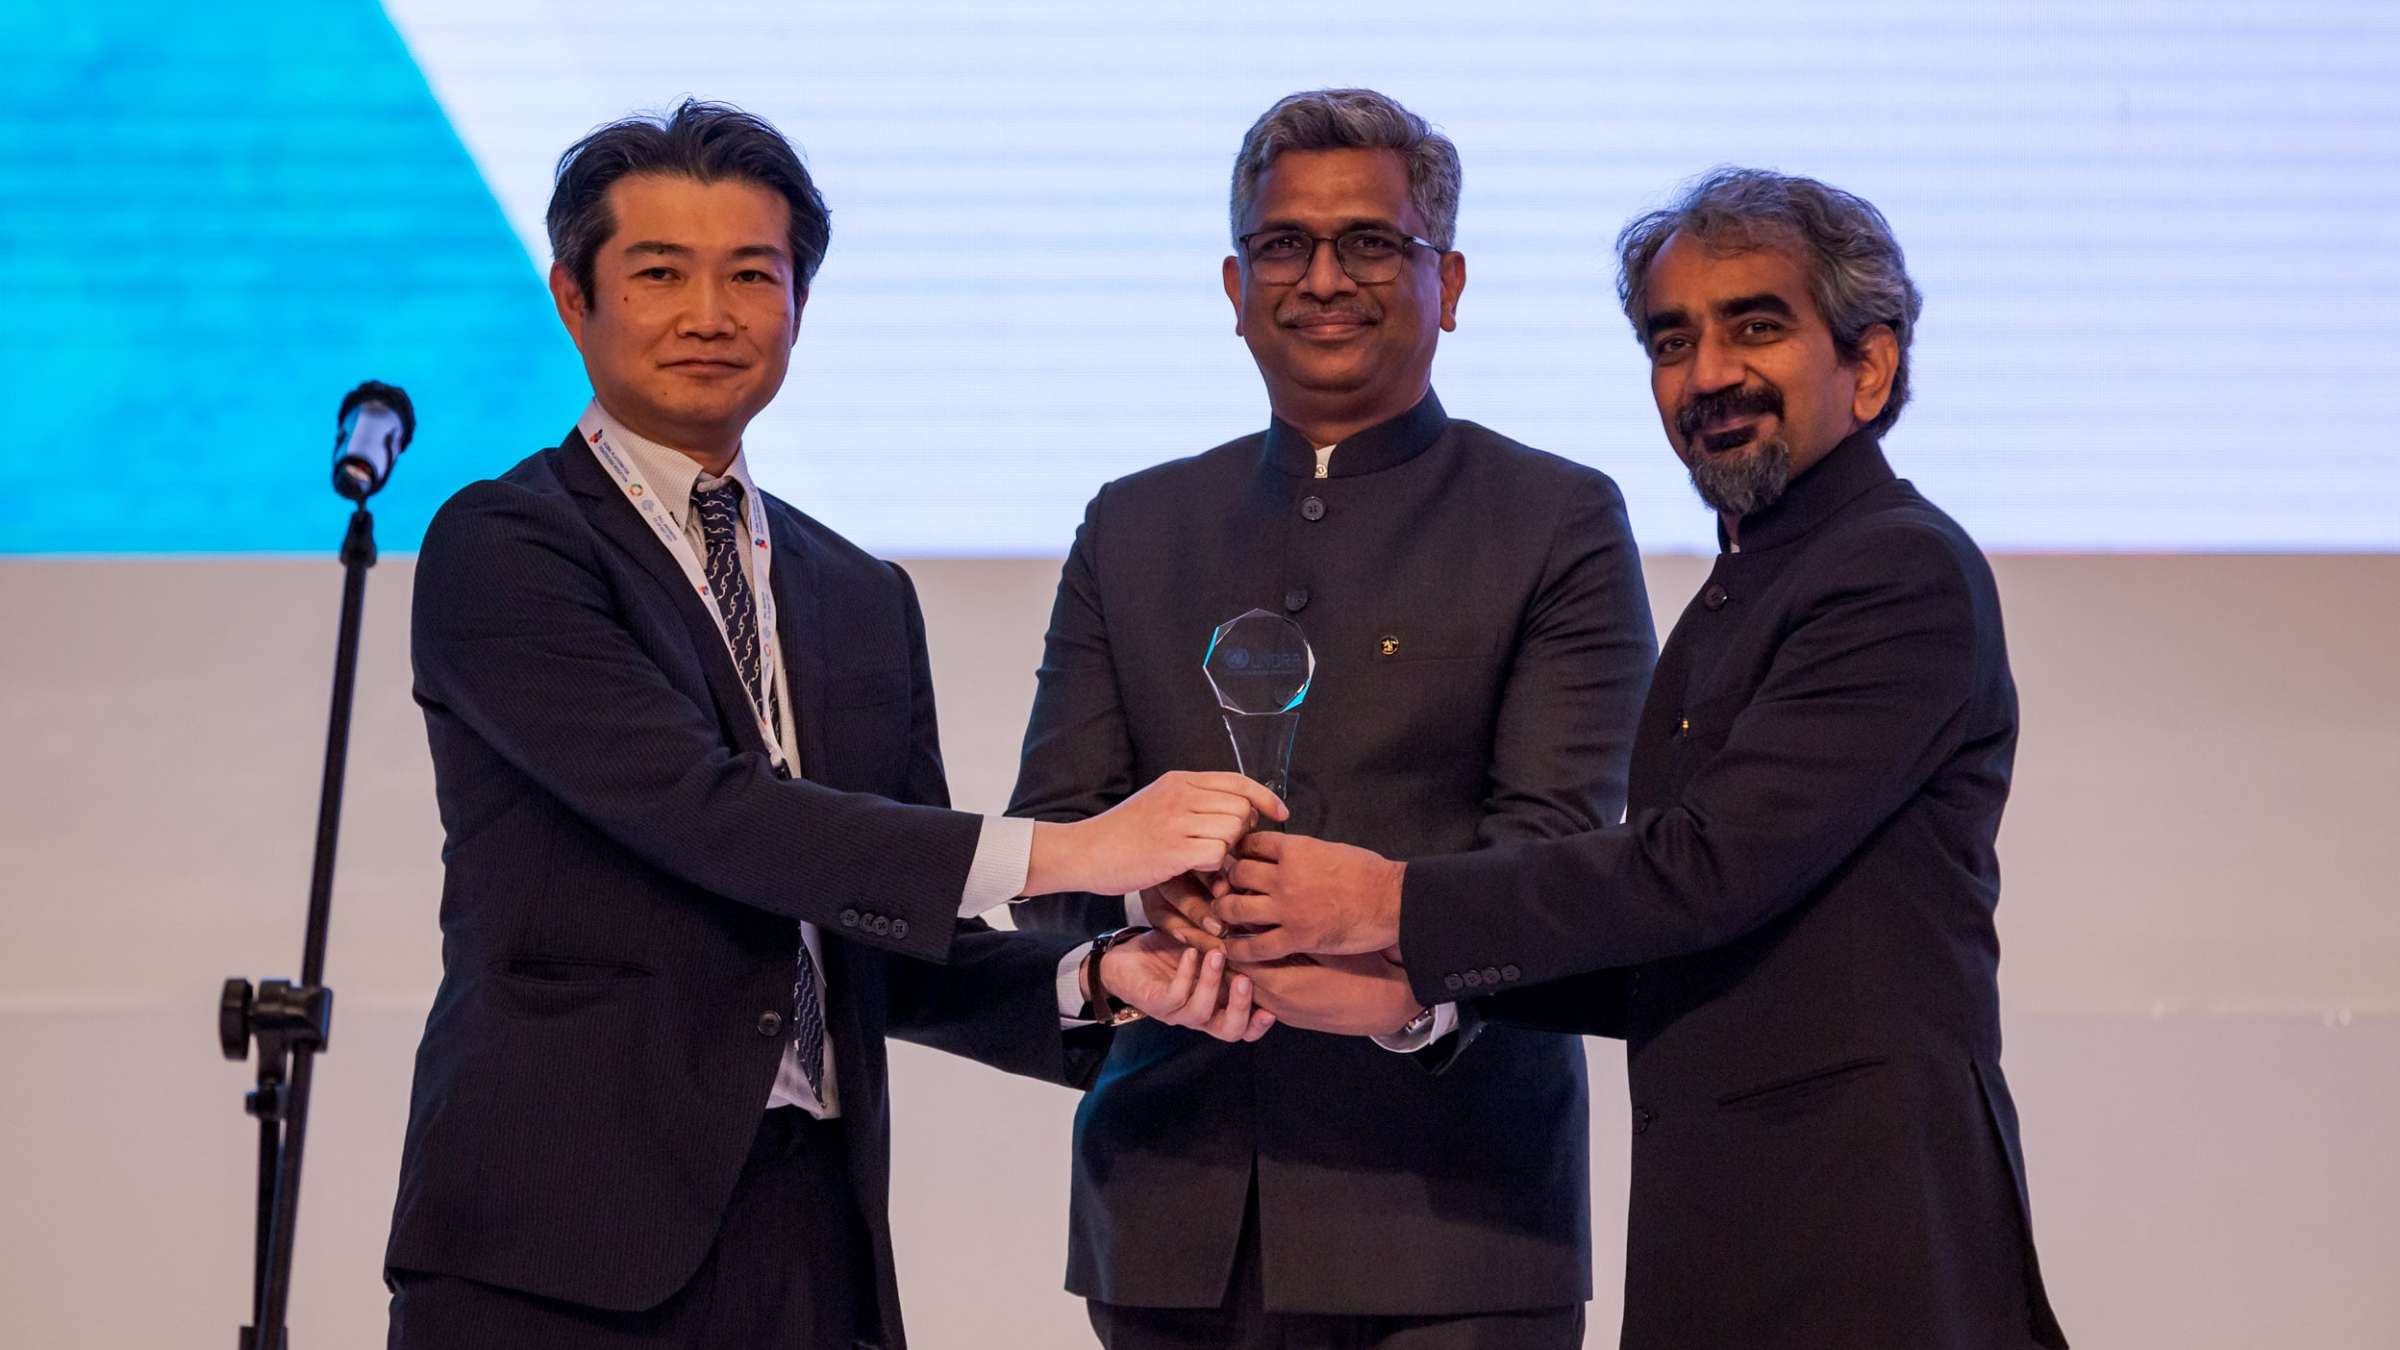 Masato Seko, Senior Program Director of Global Issues Department, The Nippon Foundation presents the UN Sasakawa Award 2022 for Disaster Risk Reduction to Dr Manu Gupta and Dr Anshu Sharma, Founders, SEEDS